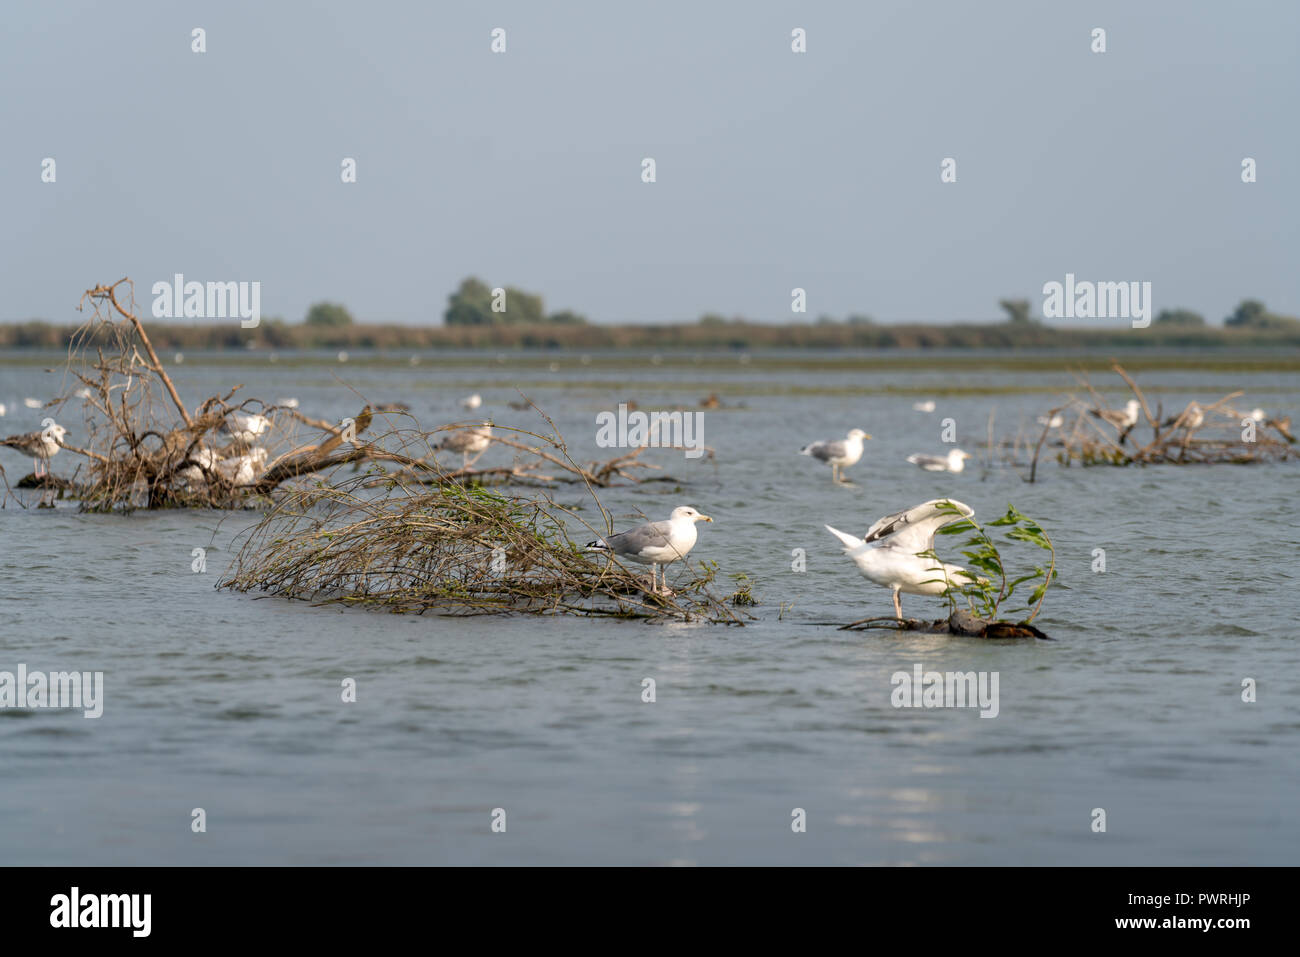 Seagulls standing on a submerged tree in the Danube Delta Stock Photo